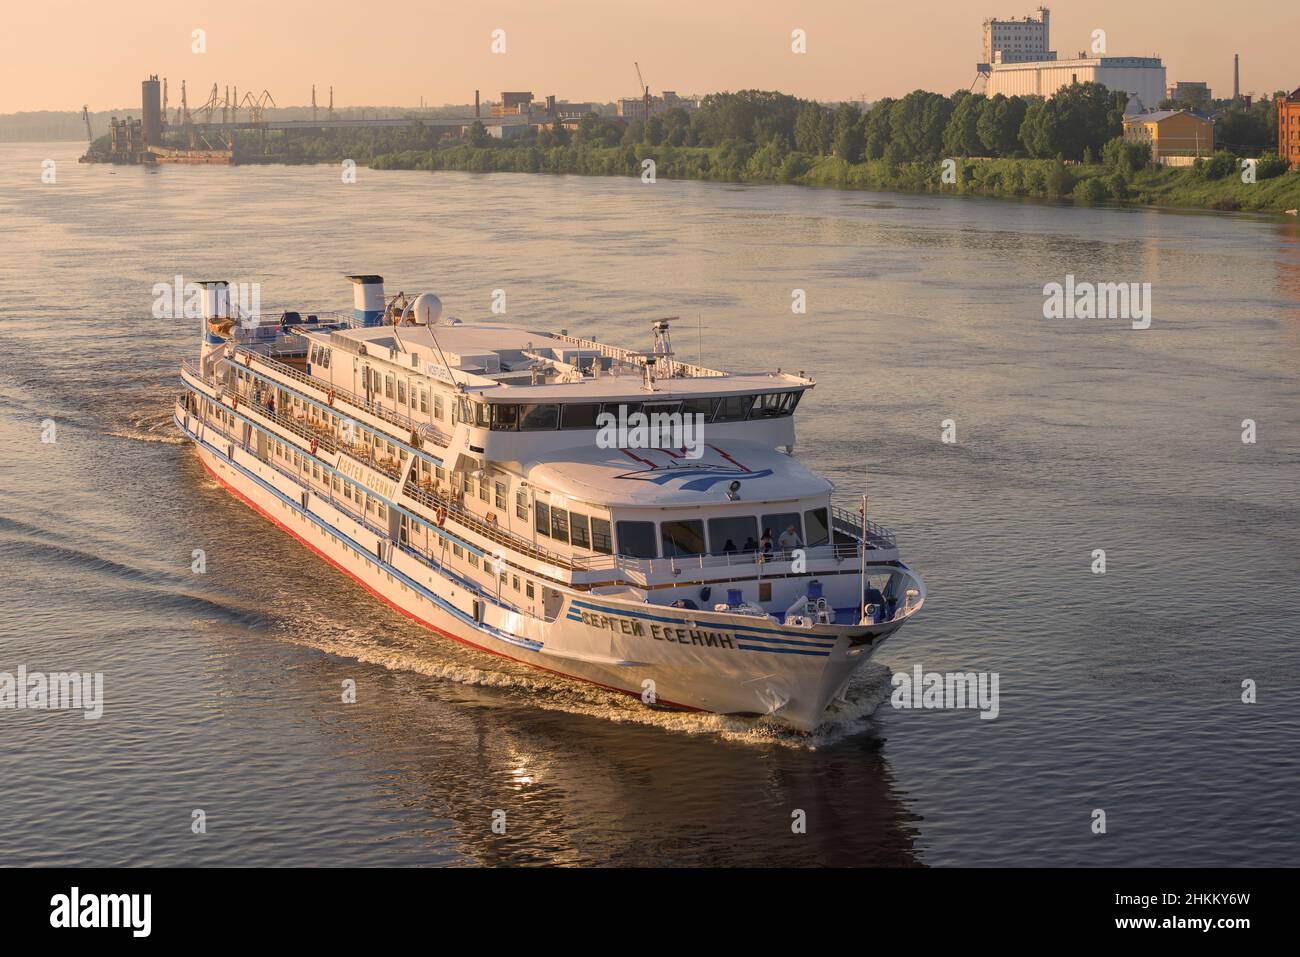 RYBINSK, RUSSIA - JULY 16, 2017: Cruise ship 'Sergei Yesenin' on the Volga River on a early July morning Stock Photo